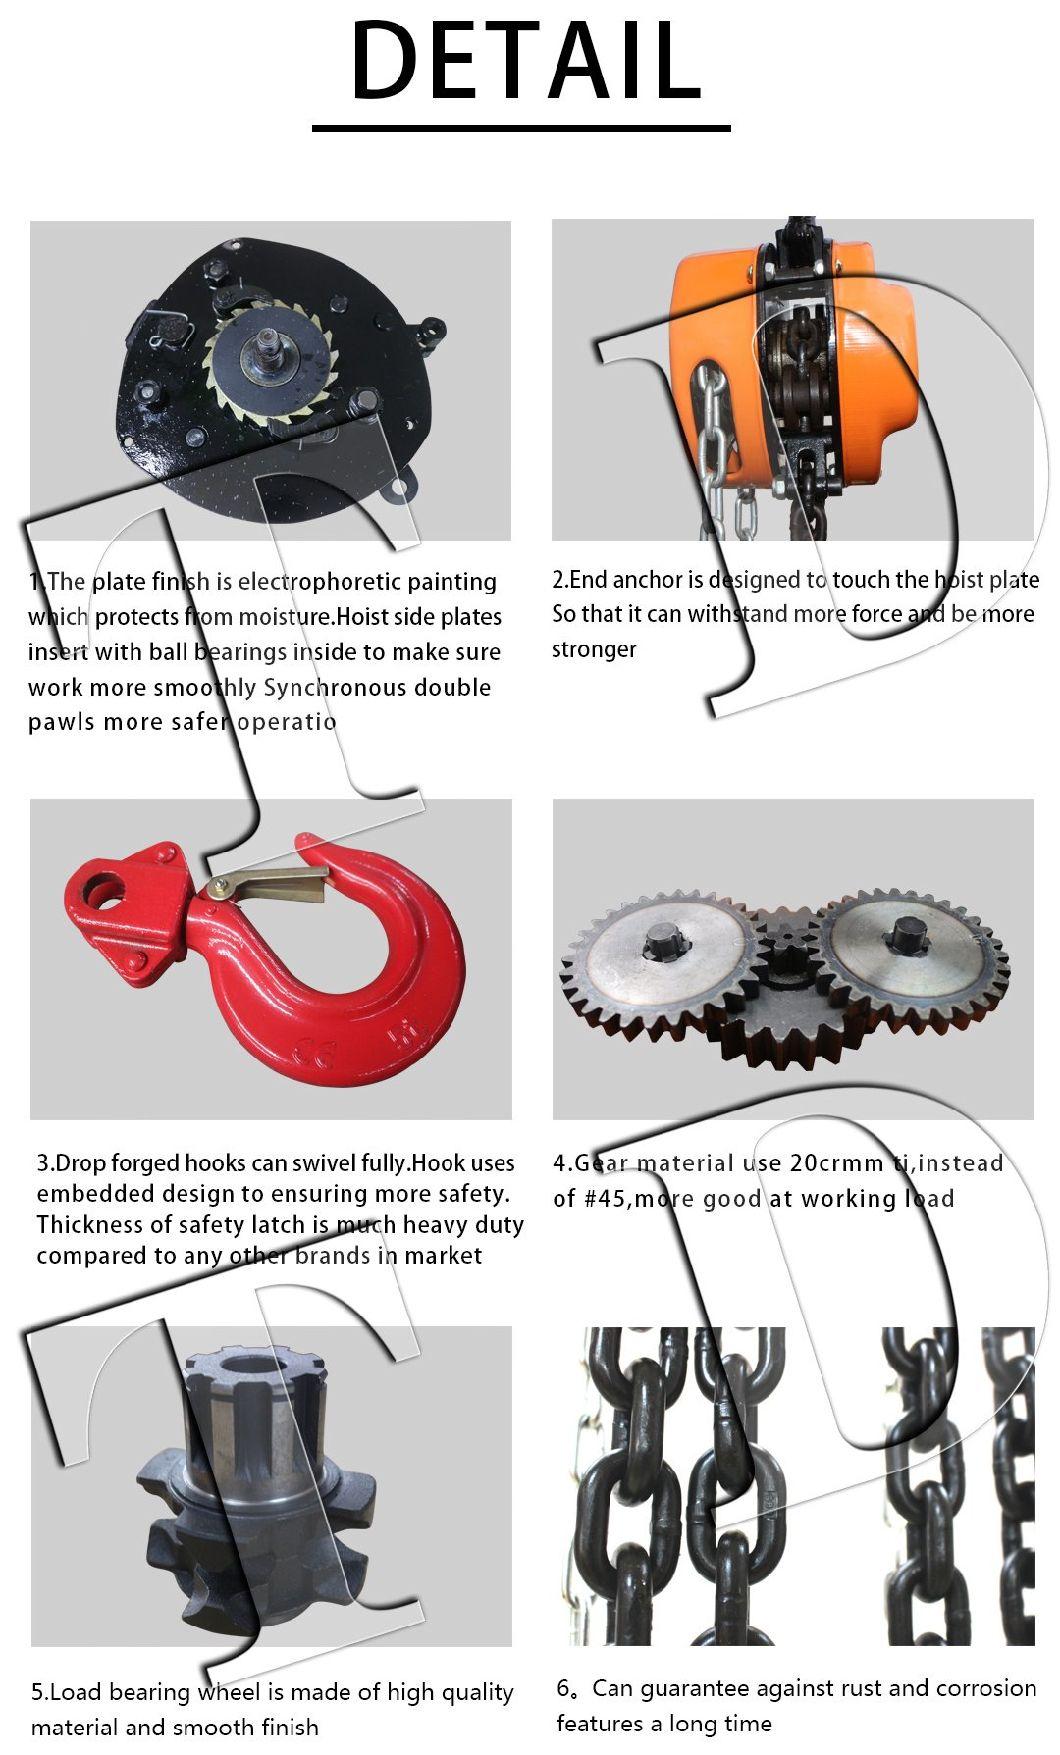 Tojo High Quality Lifting Chain Block Lever Hoist Hot Selling From 1ton to 10ton